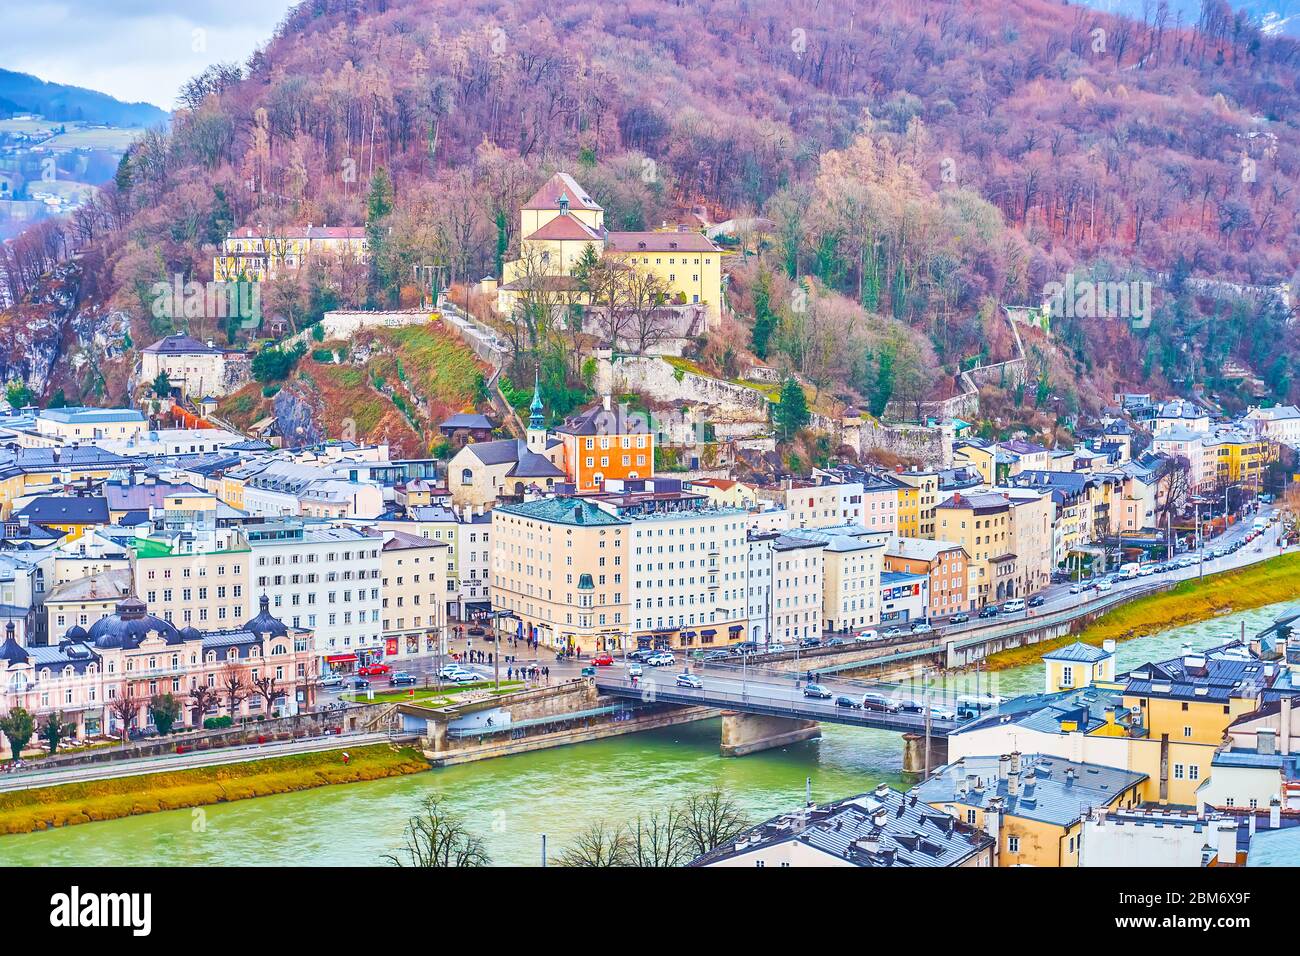 SALZBURG, AUSTRIA - MARCH 1, 2019: Enjoy great view from Monchsberg hill on medieval neighborhood with Capuchin monastery on Kapuzinerberg hill, on Ma Stock Photo